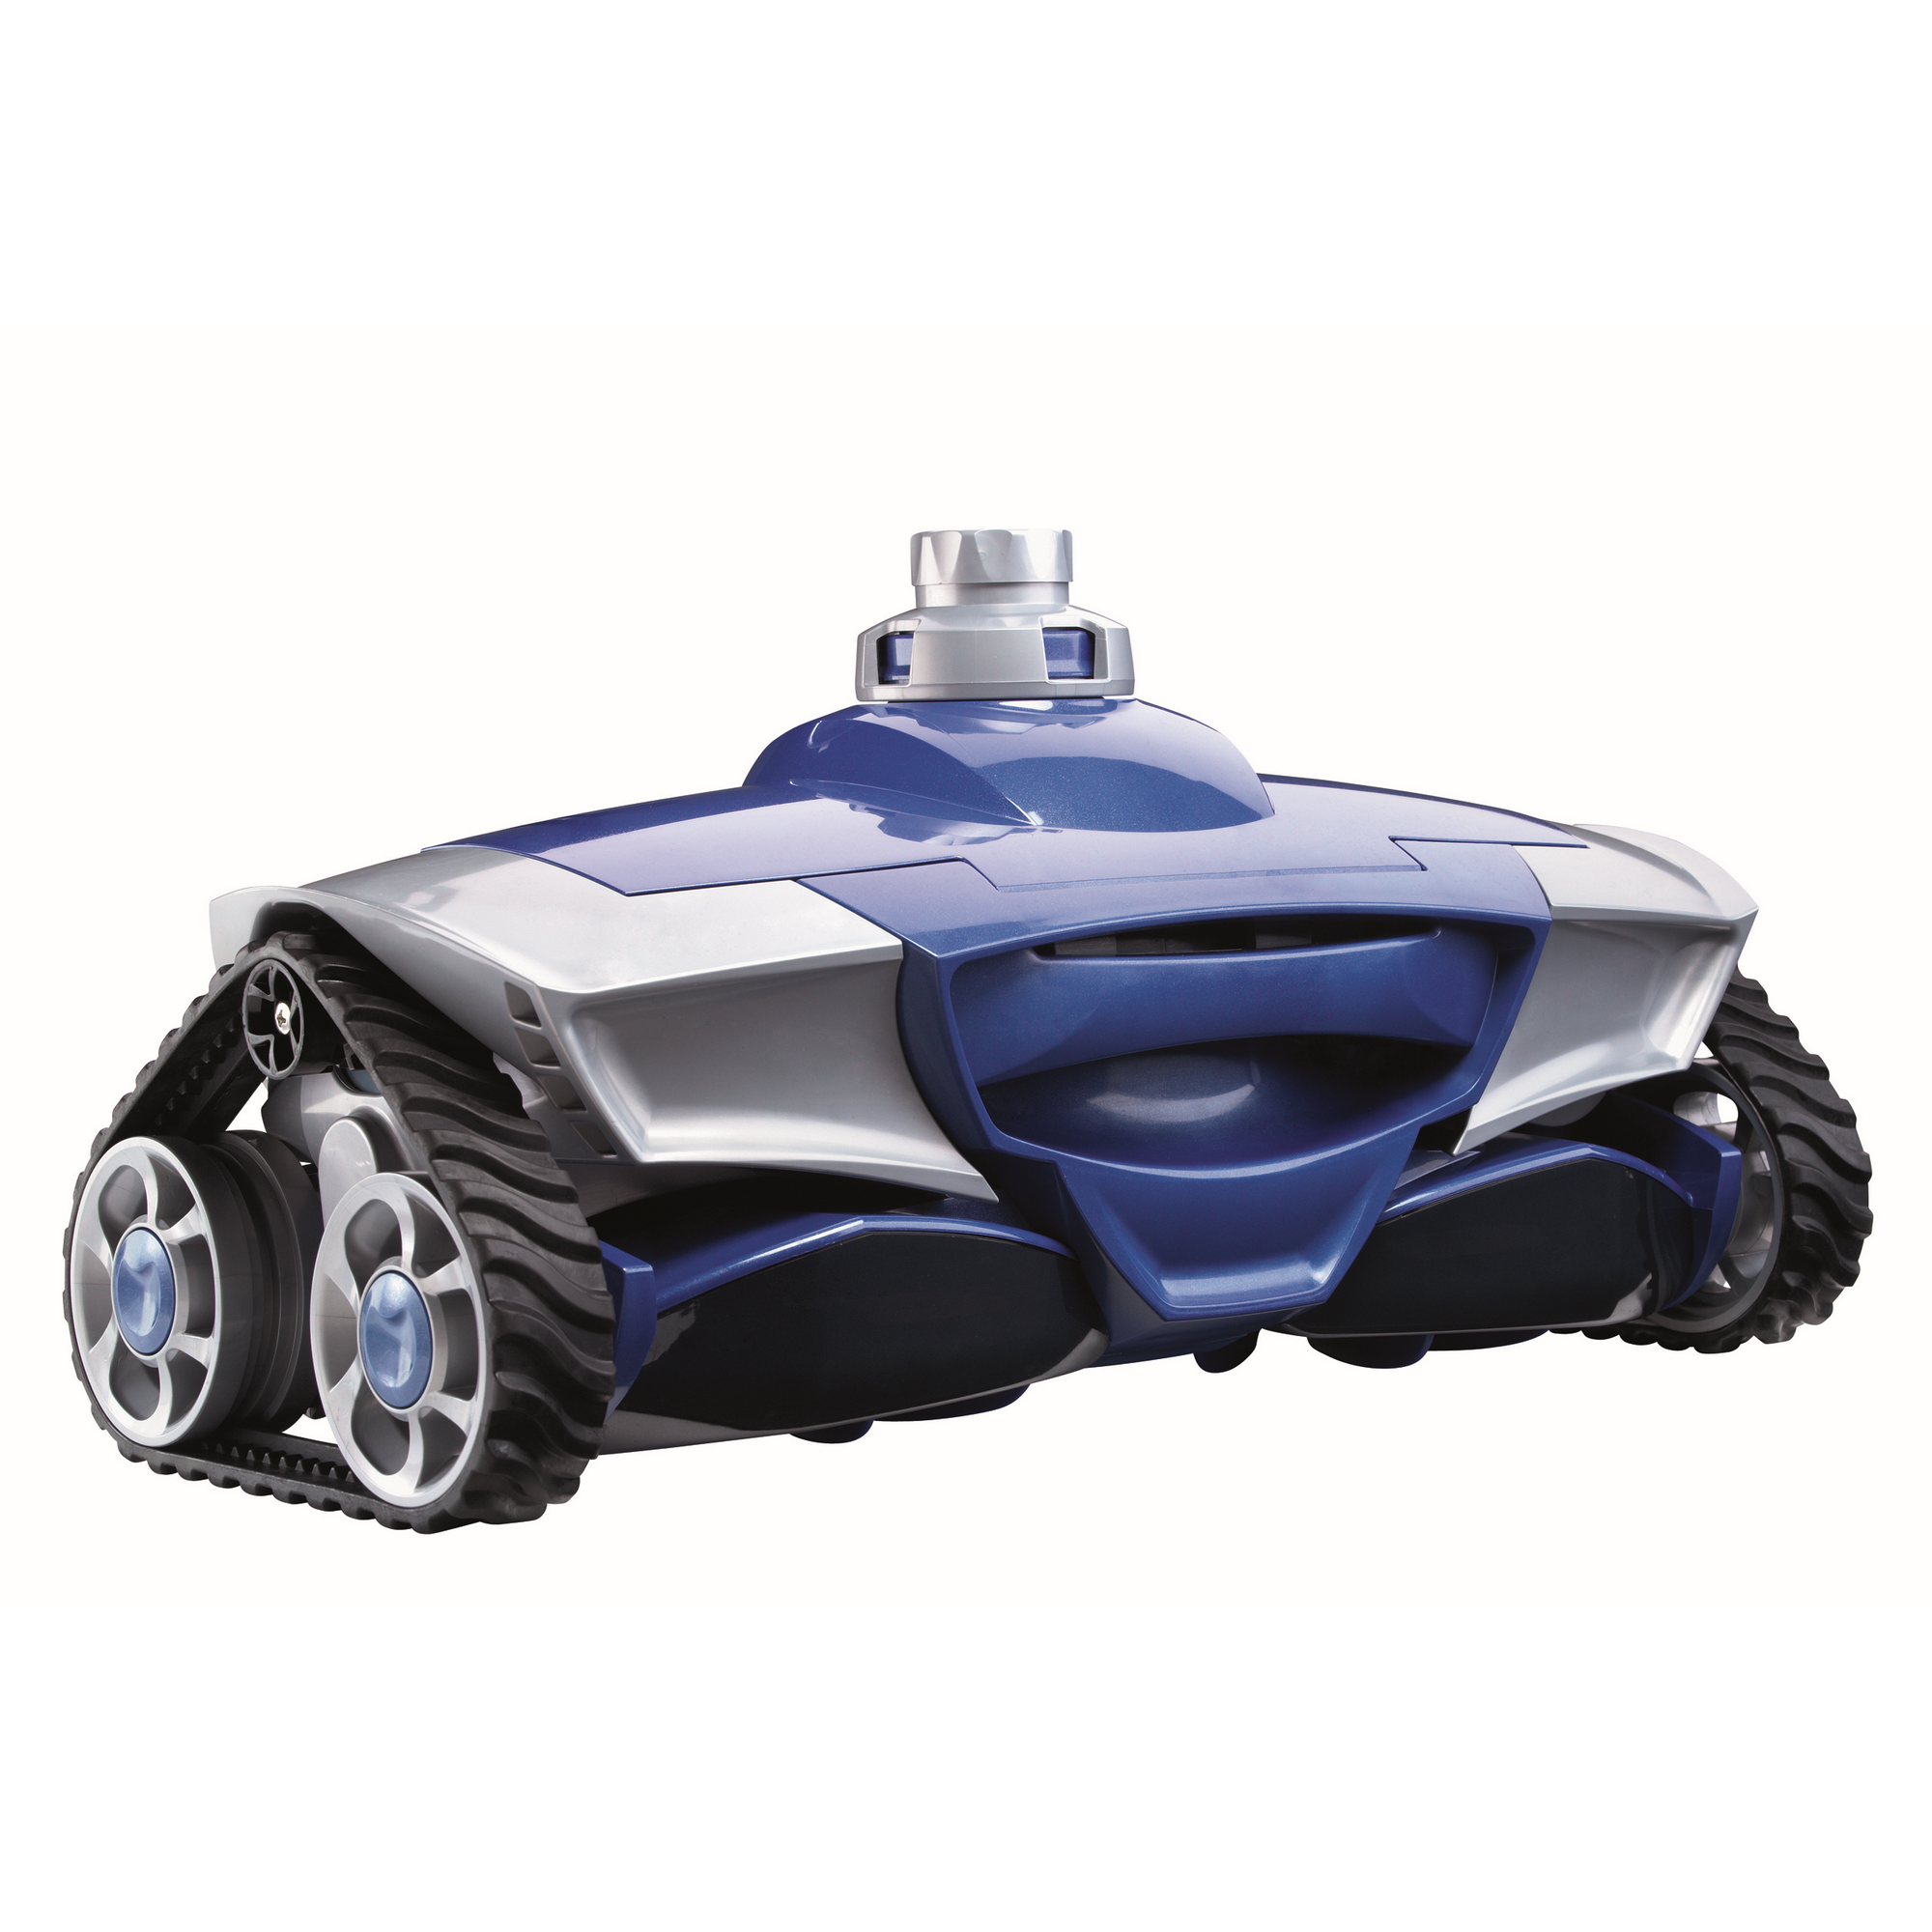 Poolroboter 'MX8' + product picture